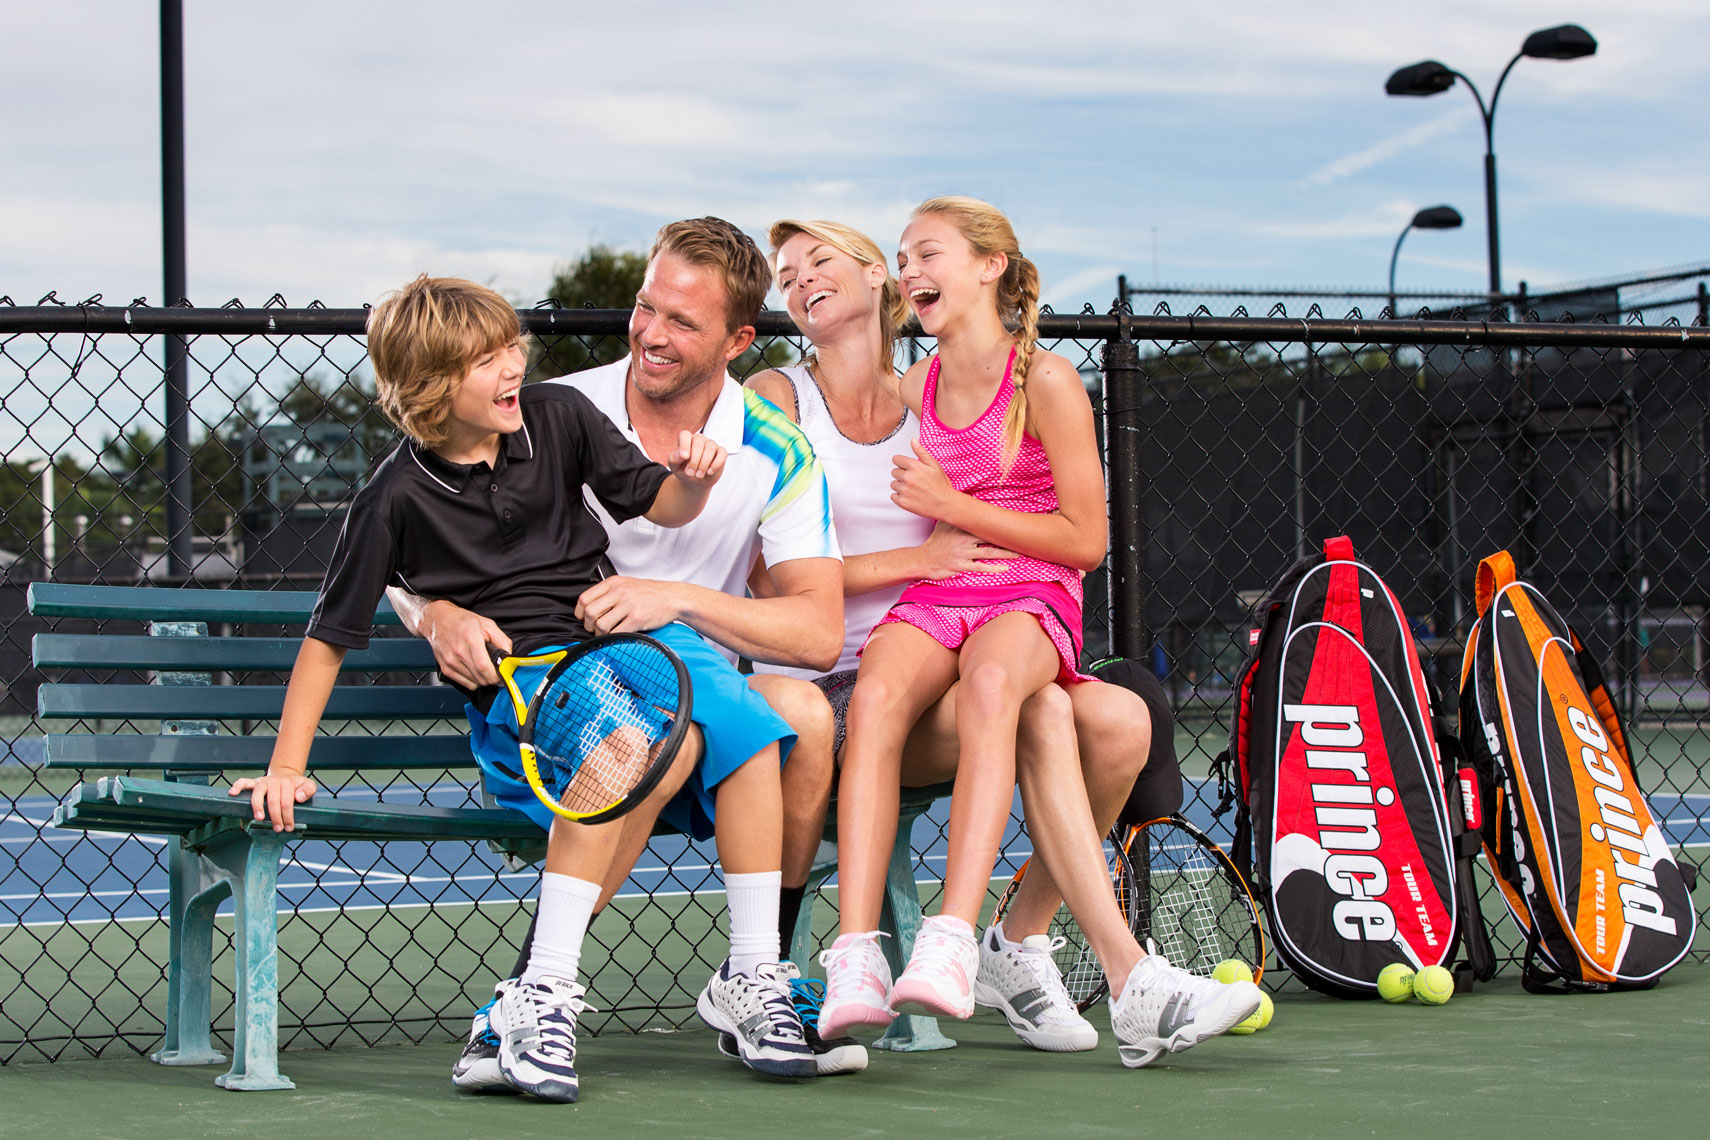 southern_california_commercial_sports_photographer_princetennis_262